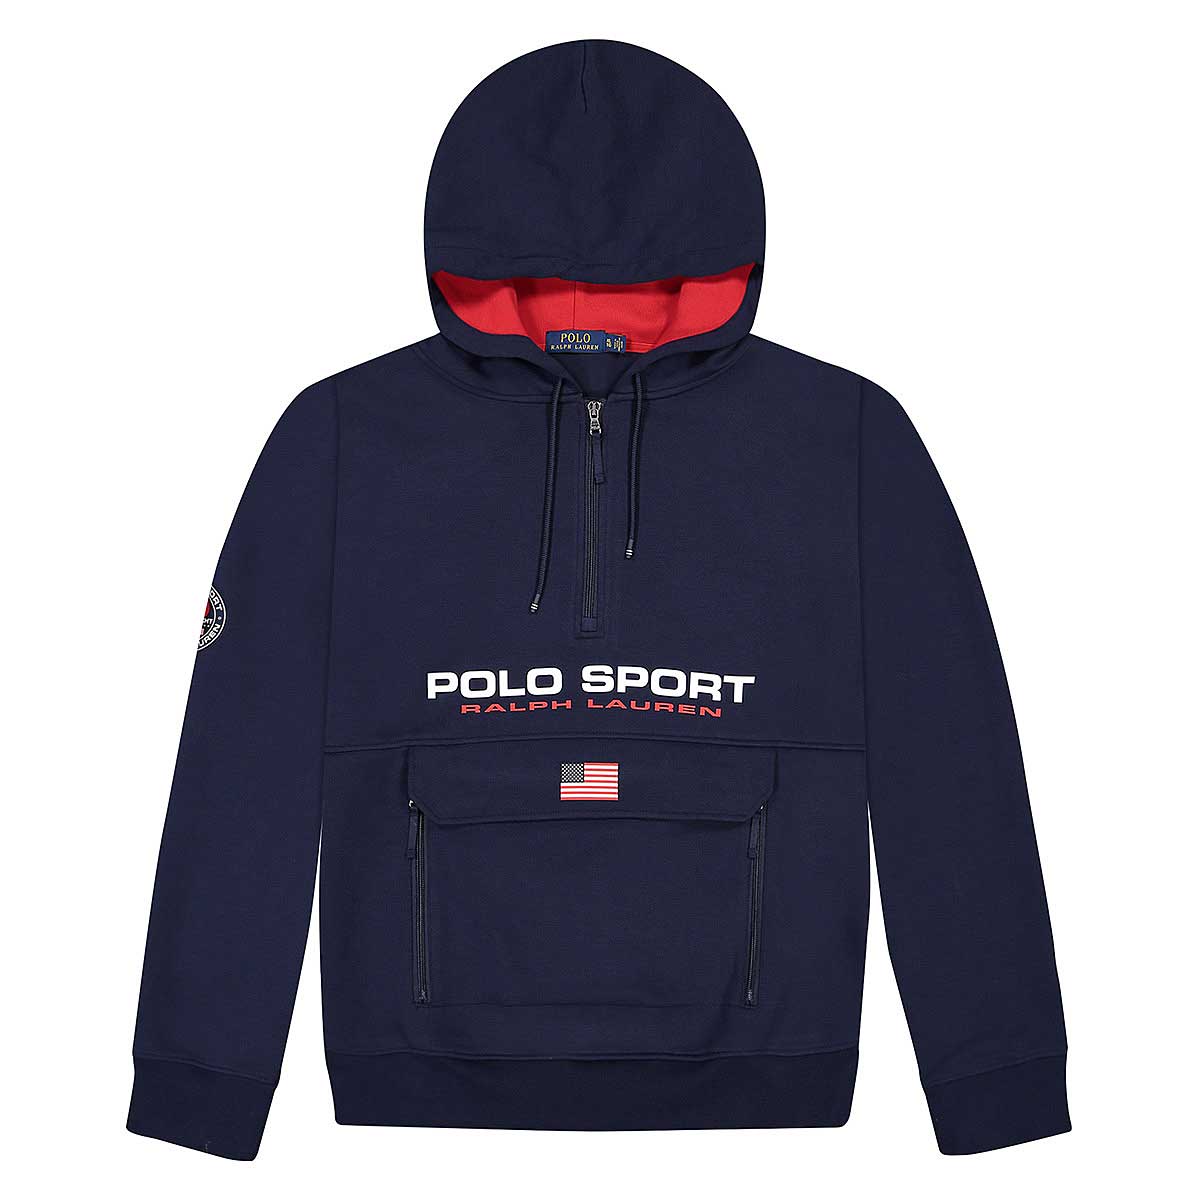 Buy DOUBLE KNIT POLO SPORT HALF ZIP JACKET for N/A  on !